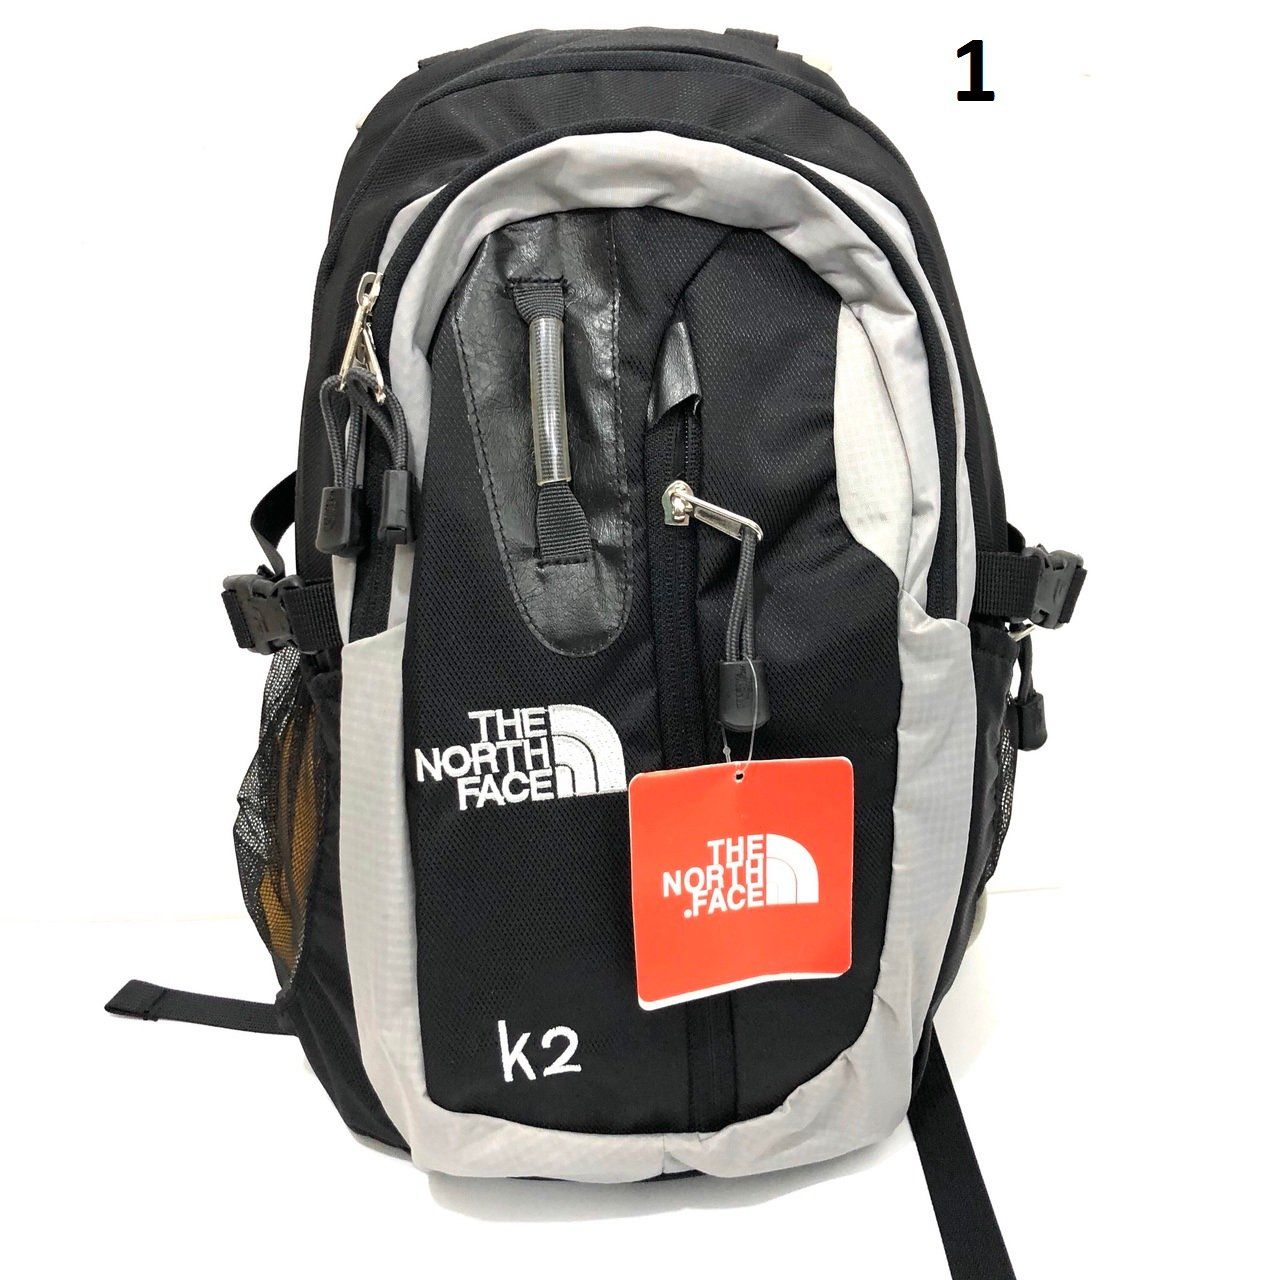 The North Face K2 Backpack Great,53% discount - ALJAZIRAHNEWS.COM